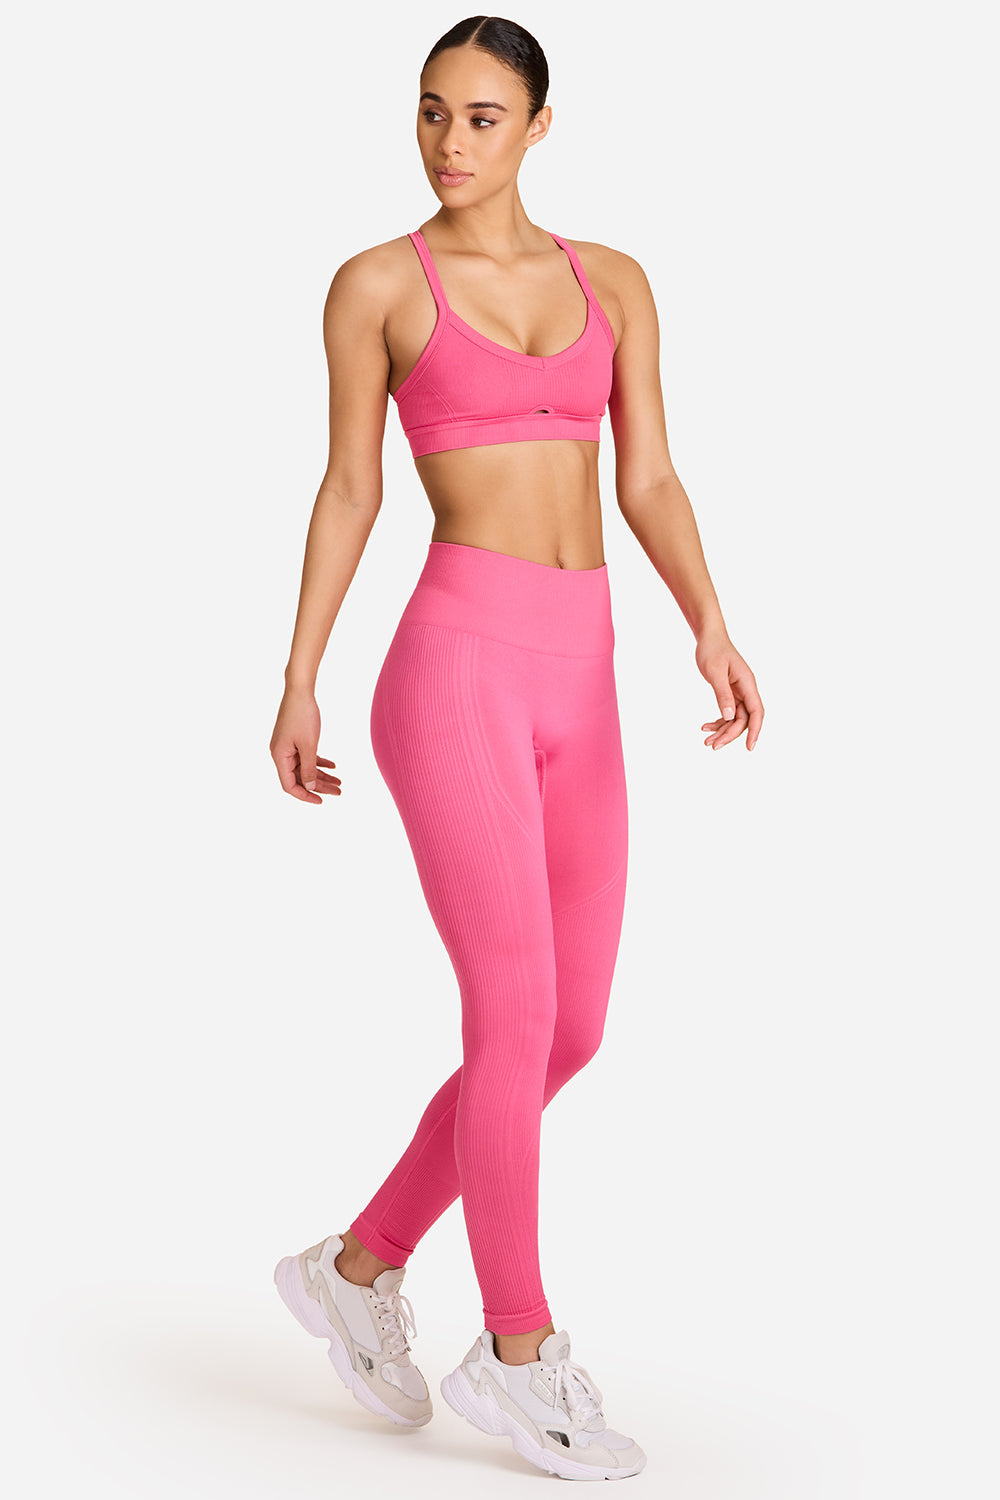 Matching Leggings and Sports Bras That Make Getting Dressed for the Gym  Ridiculously Easy